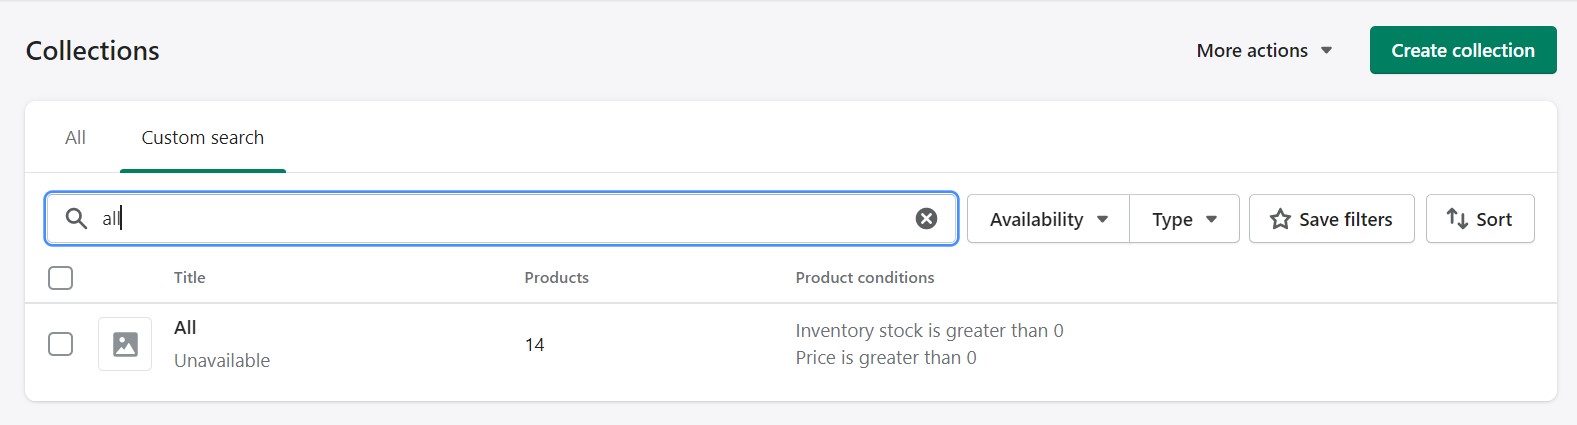 Shopify Collections search